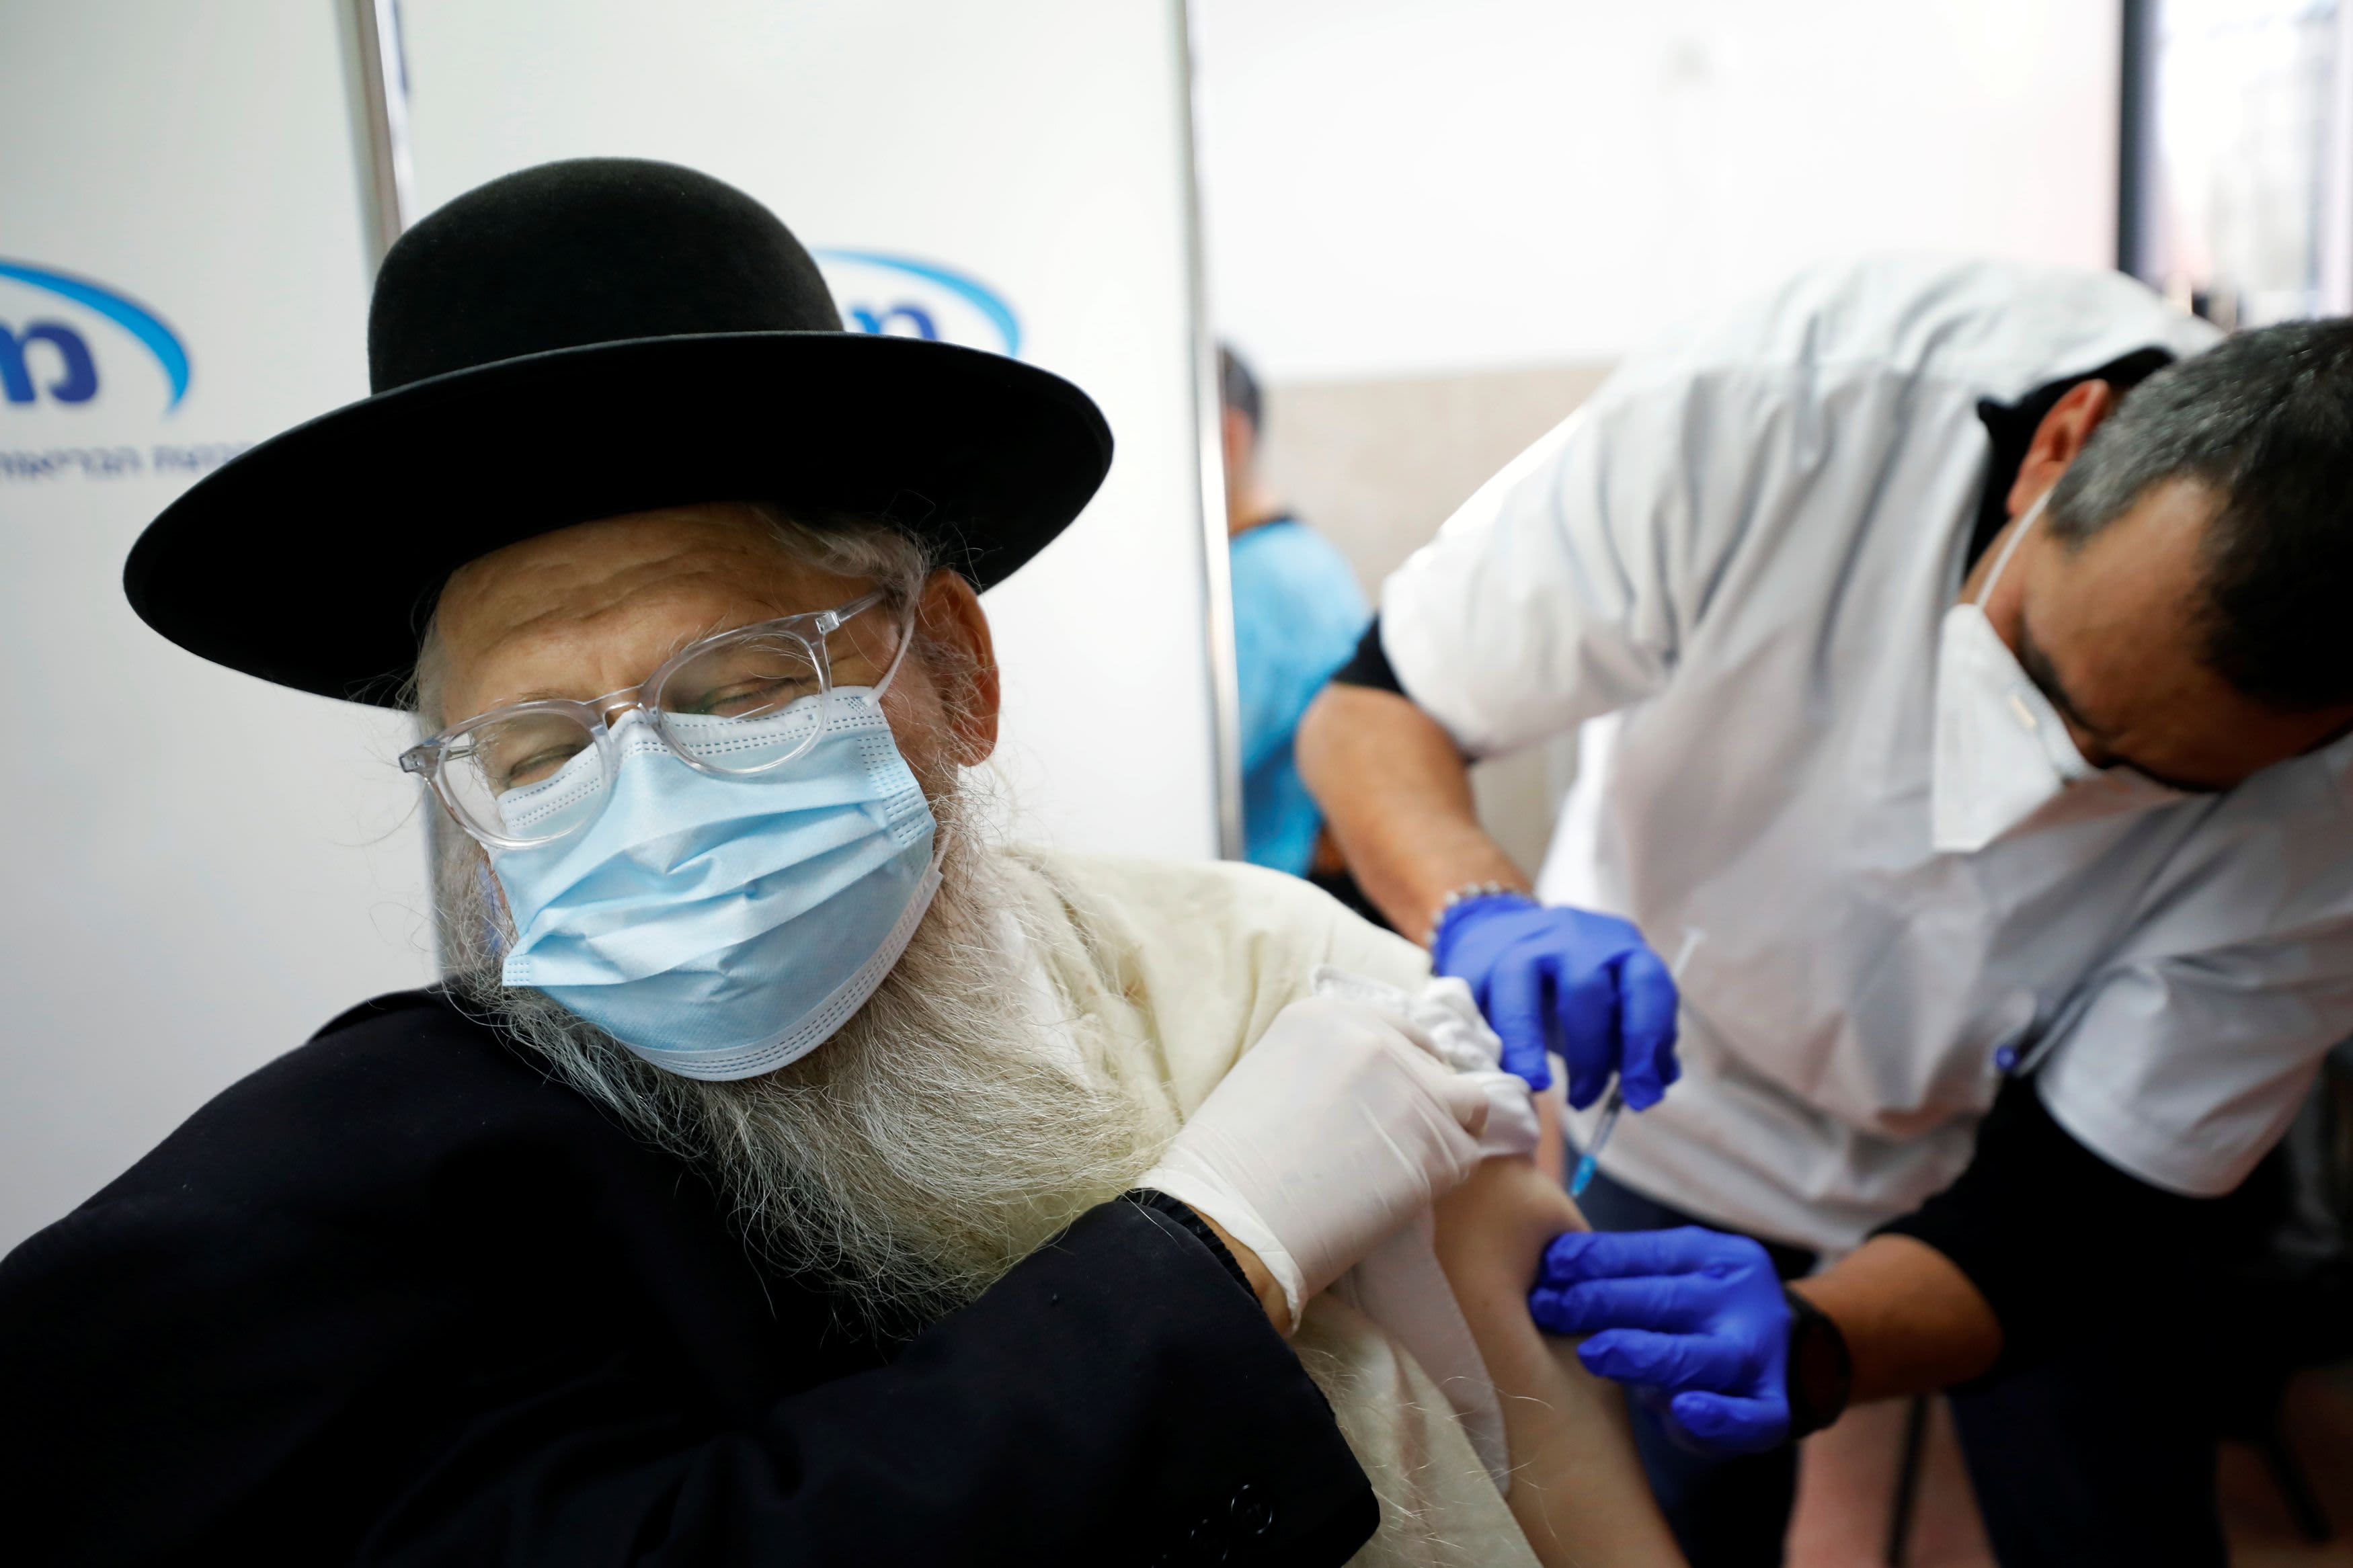 Israel says it has vaccinated 7% of its population against Covid, it's less than 1% in U.S.